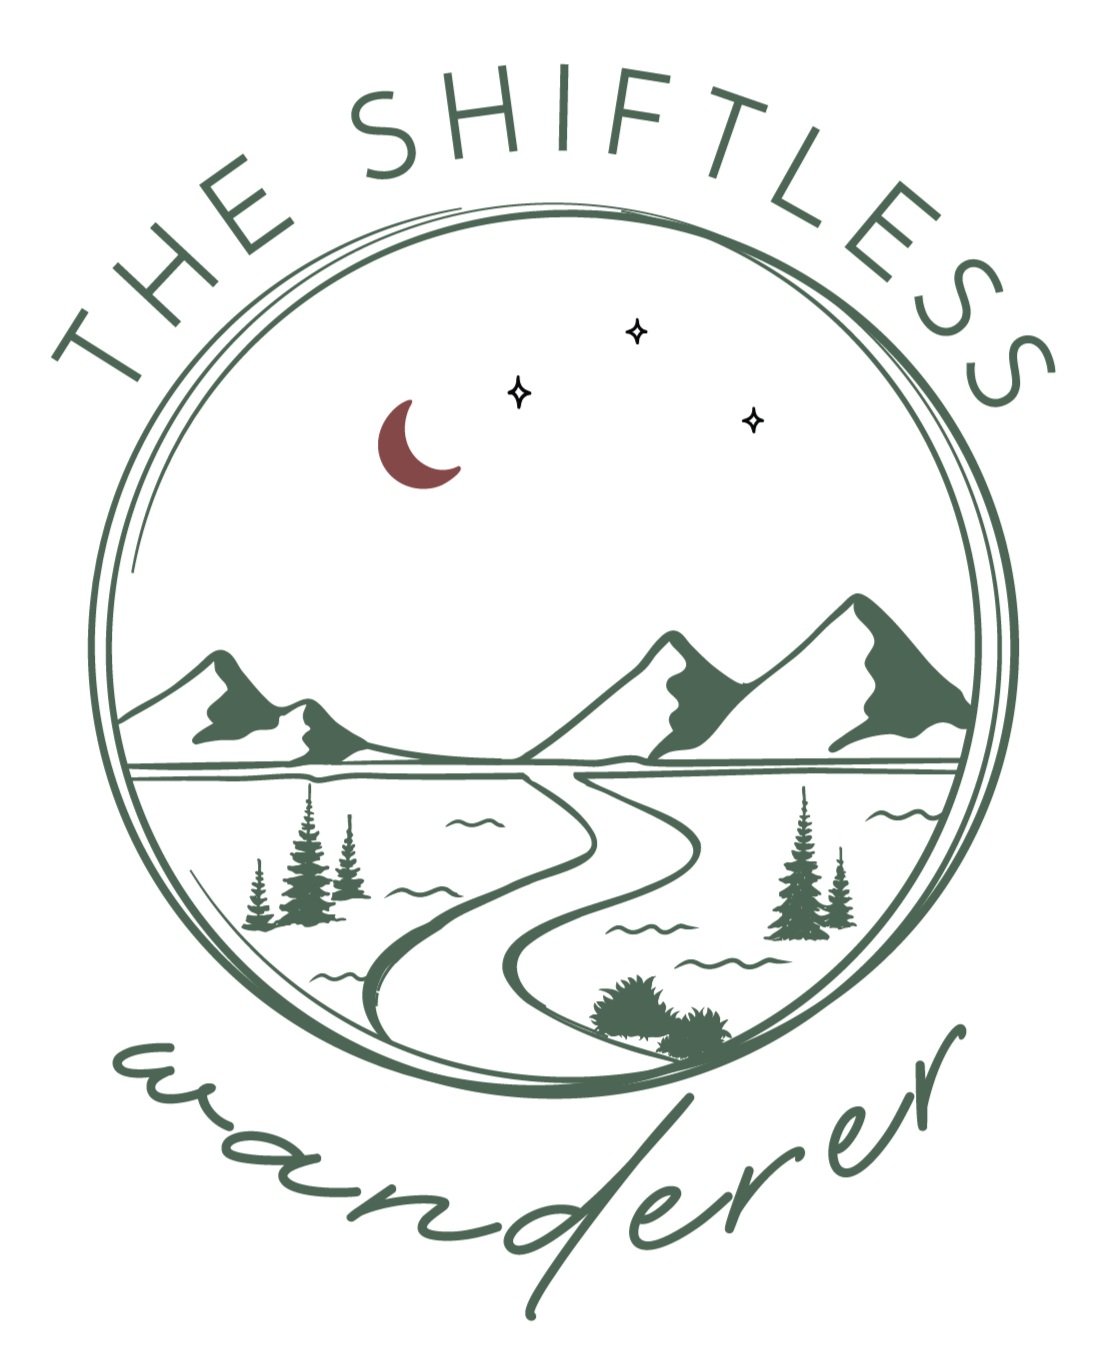 The Shiftless Wanderer